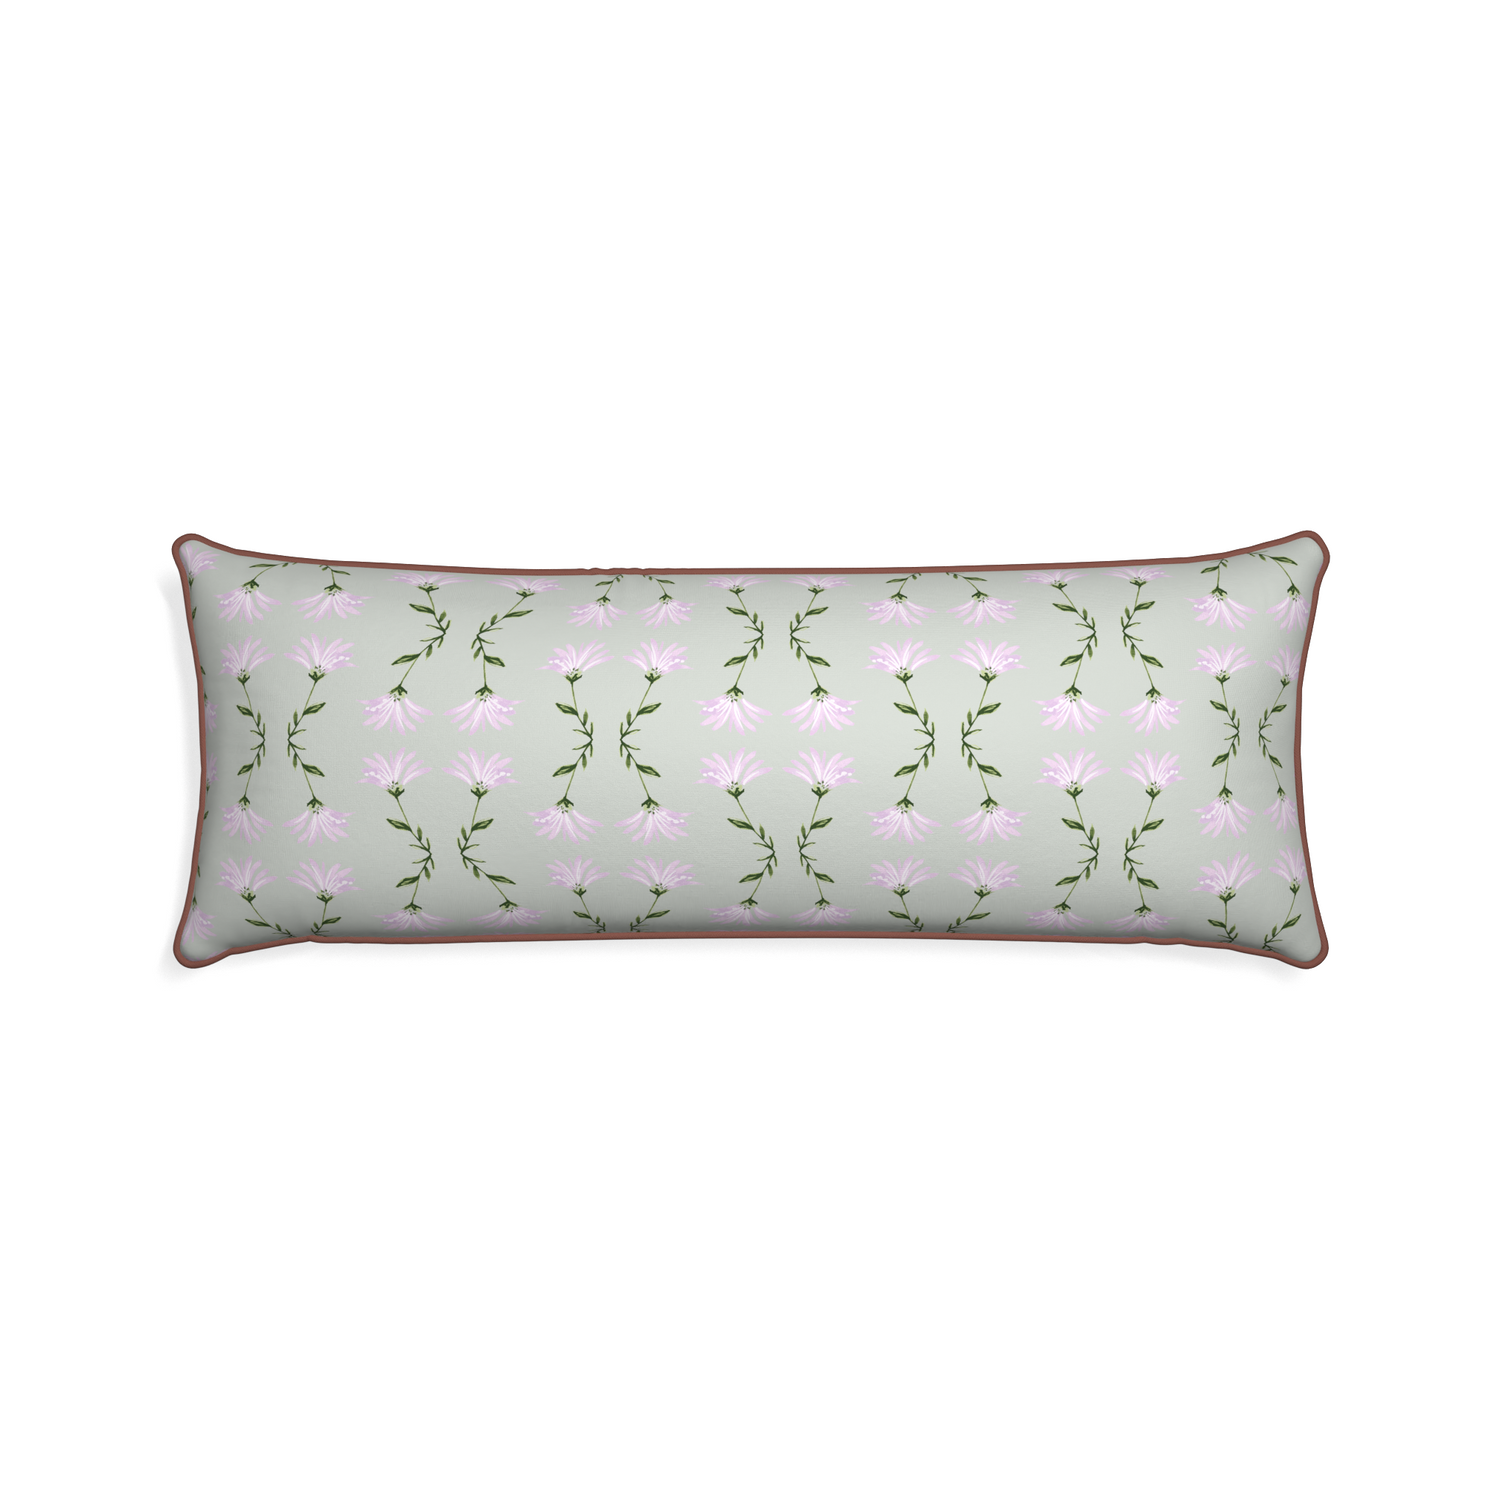 Xl-lumbar marina sage custom pillow with w piping on white background